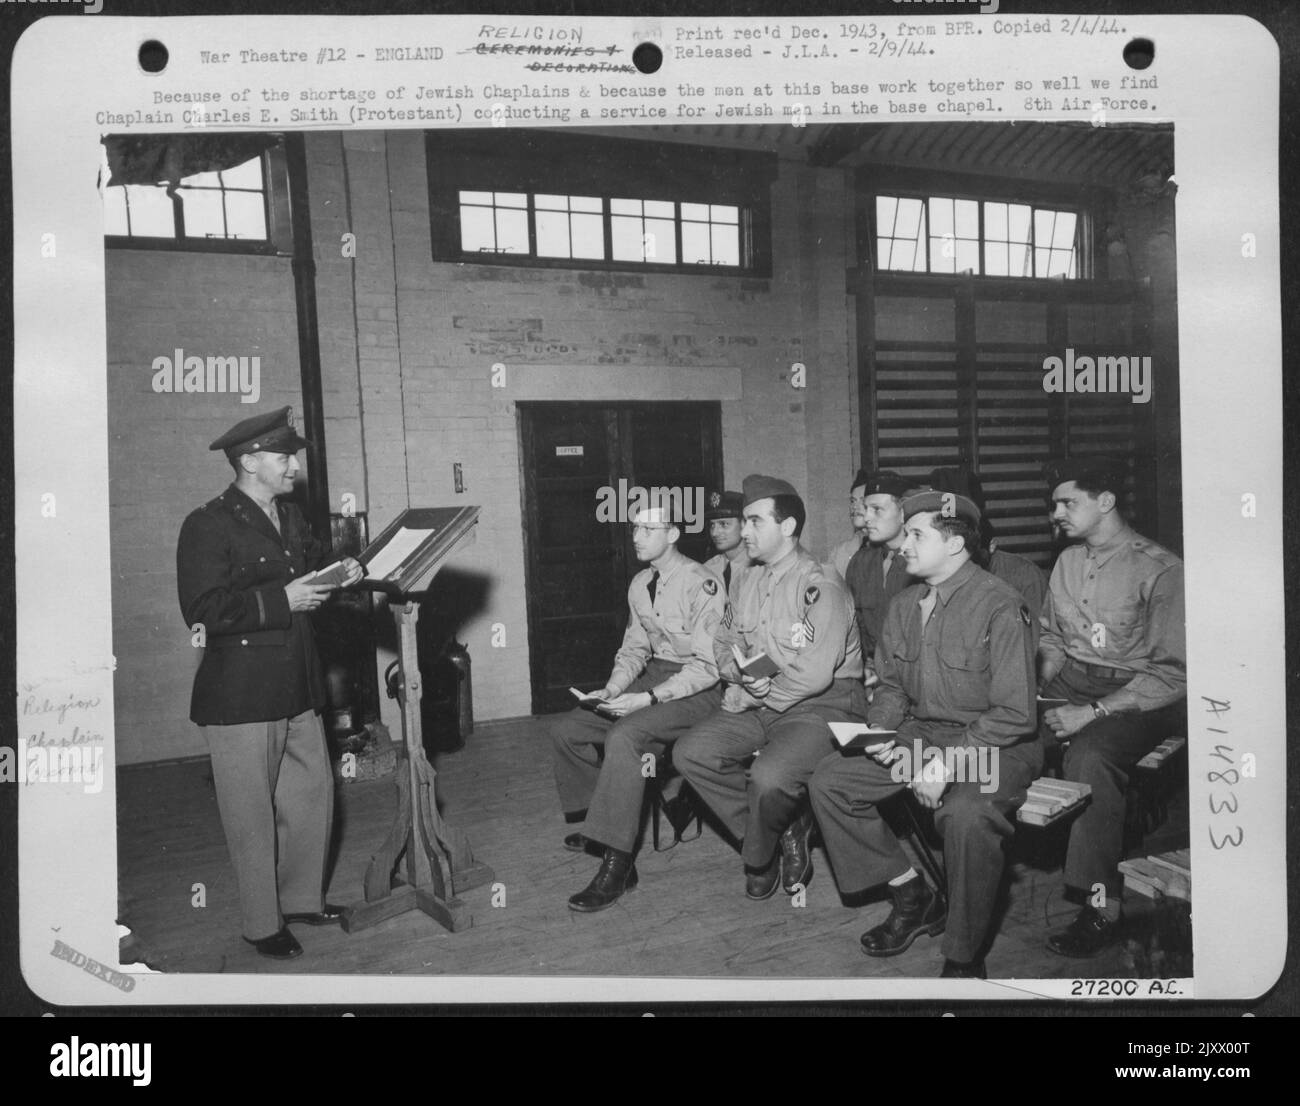 Because of the shortage of Jewish Chaplains & because the men at this base work together so well we find Chaplain Charles E. Smith (Protestant) conducting a service for Jewish men in the base chapel. 8th Air force. Stock Photo